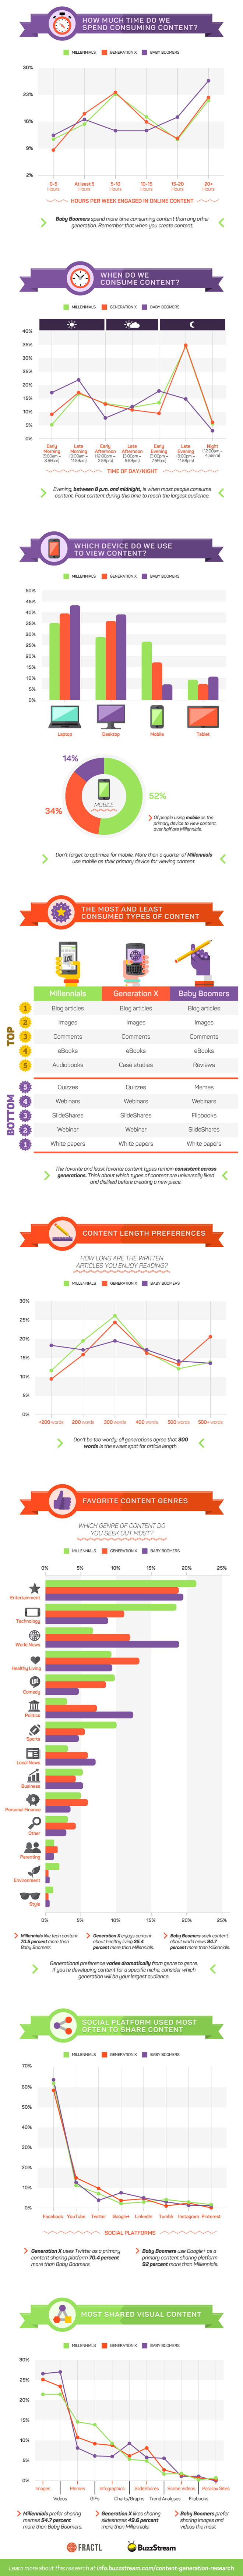 The Generational Content Gap: How Different Generations Consume Content Online!